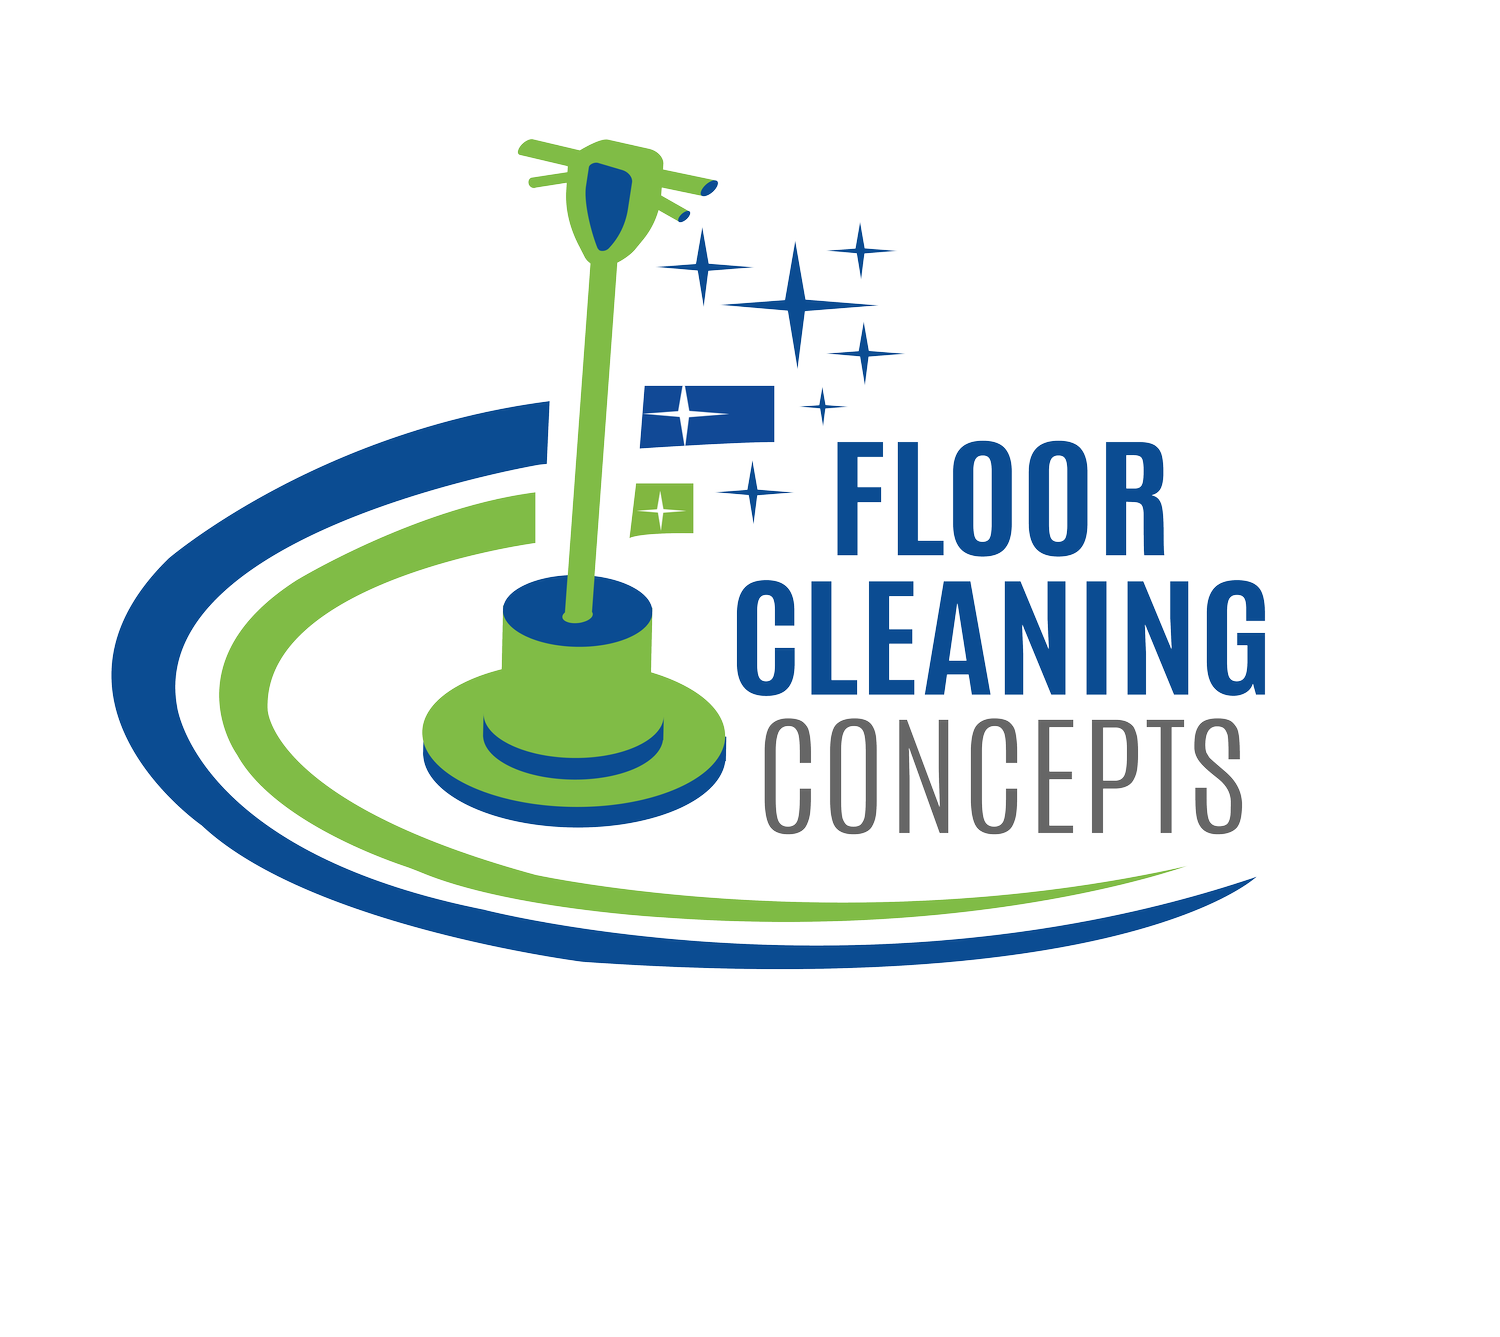 floor cleaning concepts